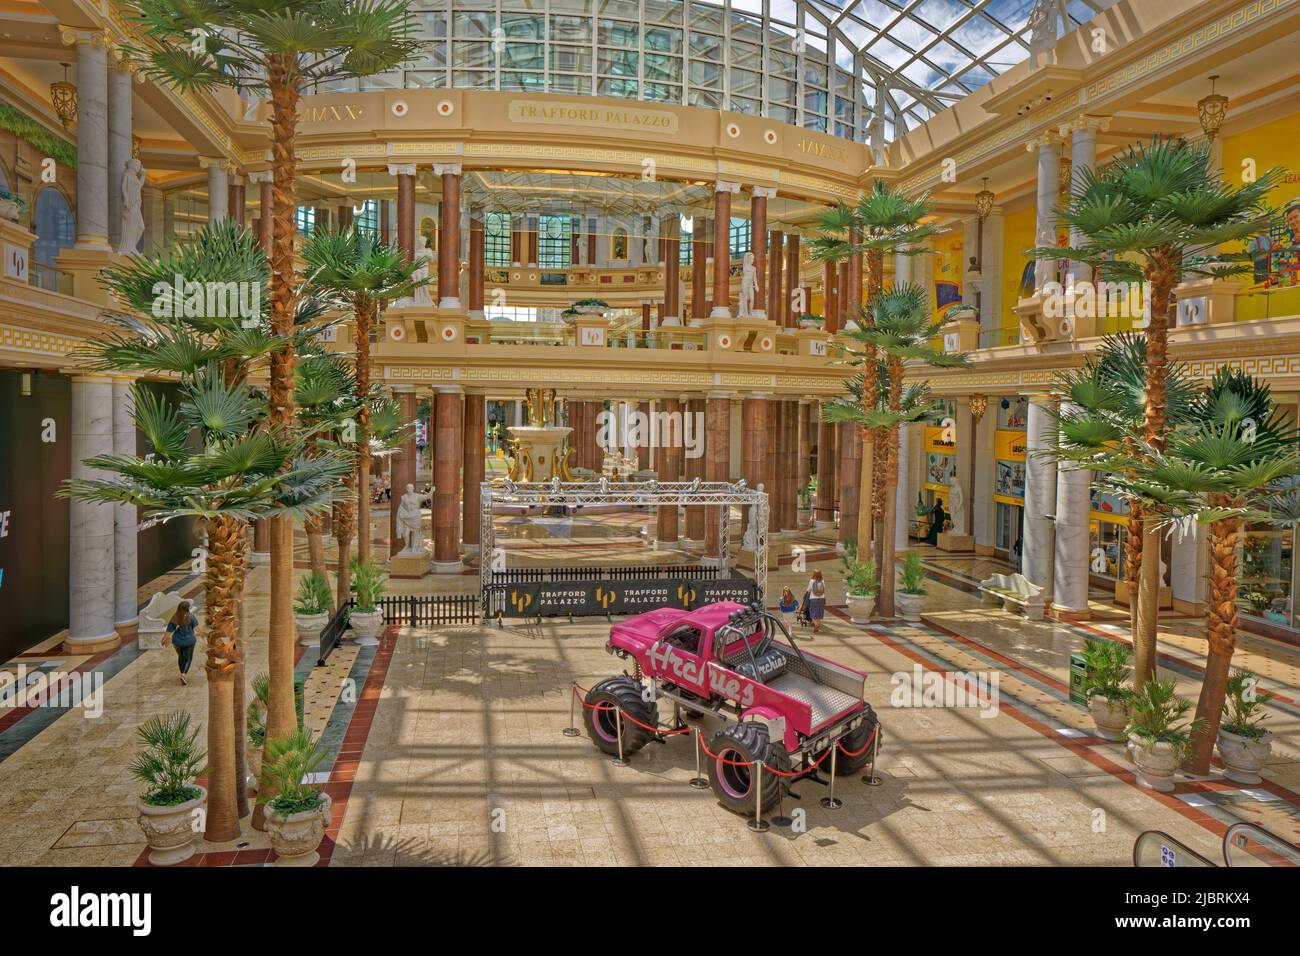 Trafford Palazzo at the Trafford Centre Malls, Greater Manchester in England. Stock Photo